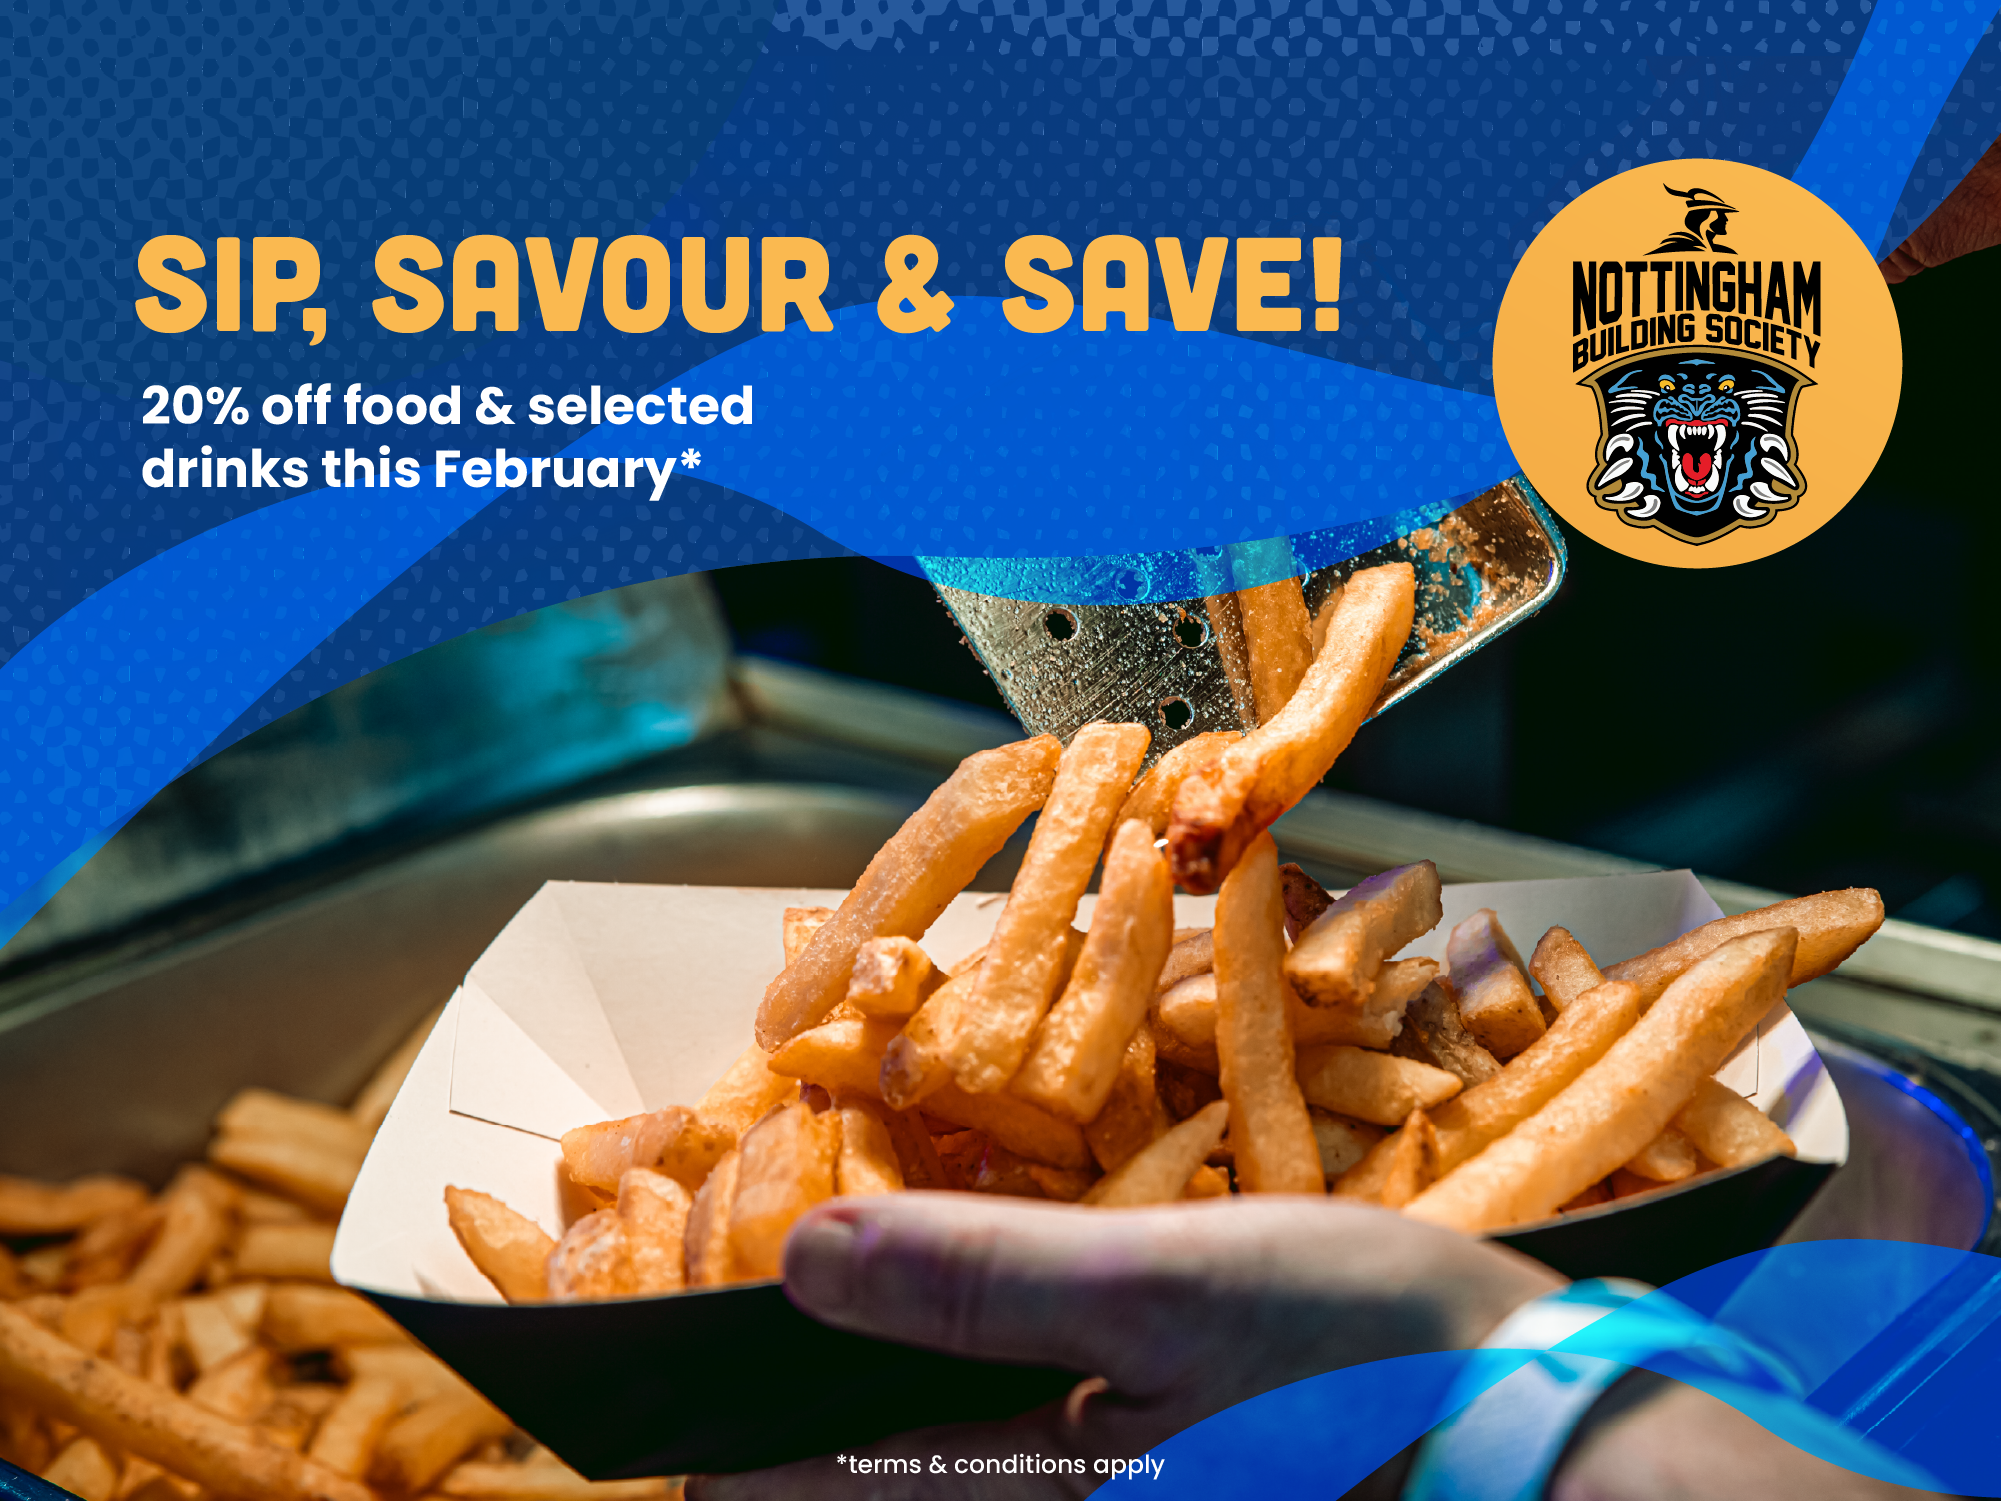 20% OFF FOOD AND SELECTED DRINKS IN FEBRUARY Top Image